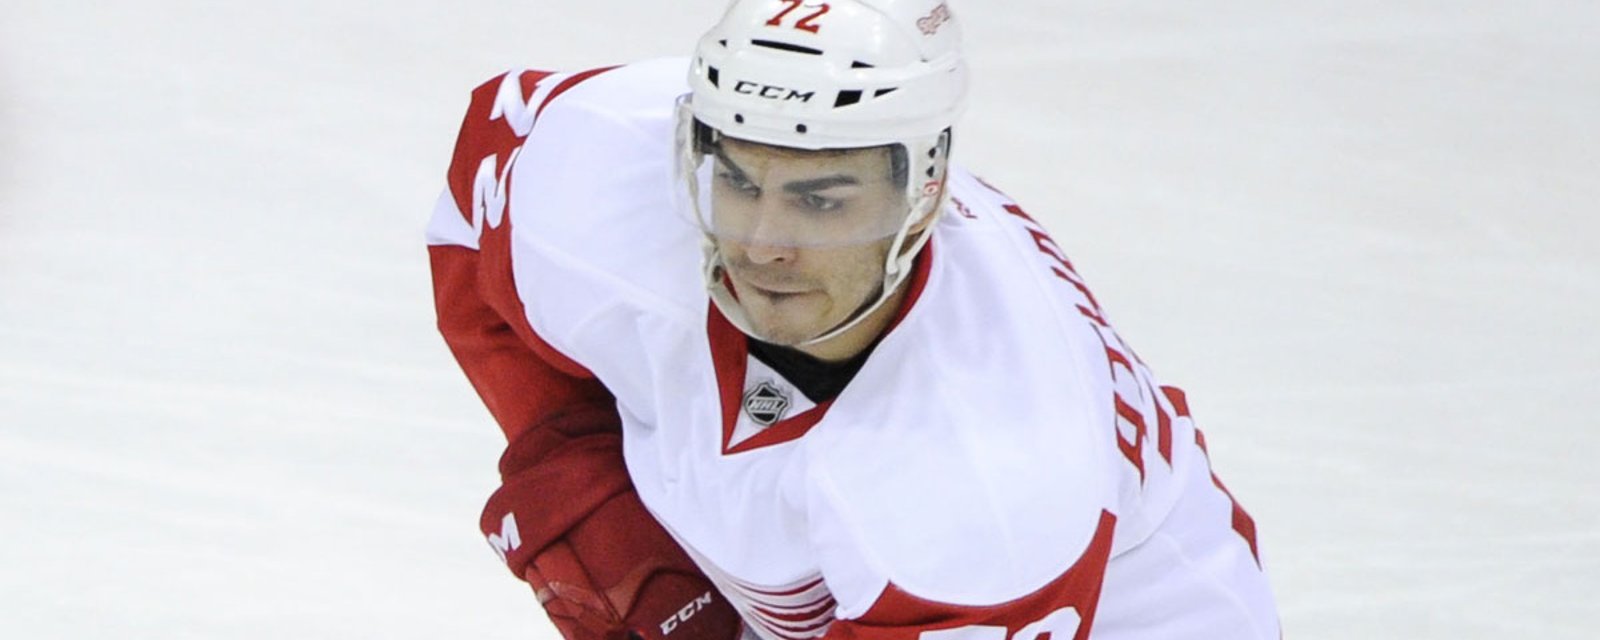 Rumor: Another team enters the mix for Wings’ Athanasiou